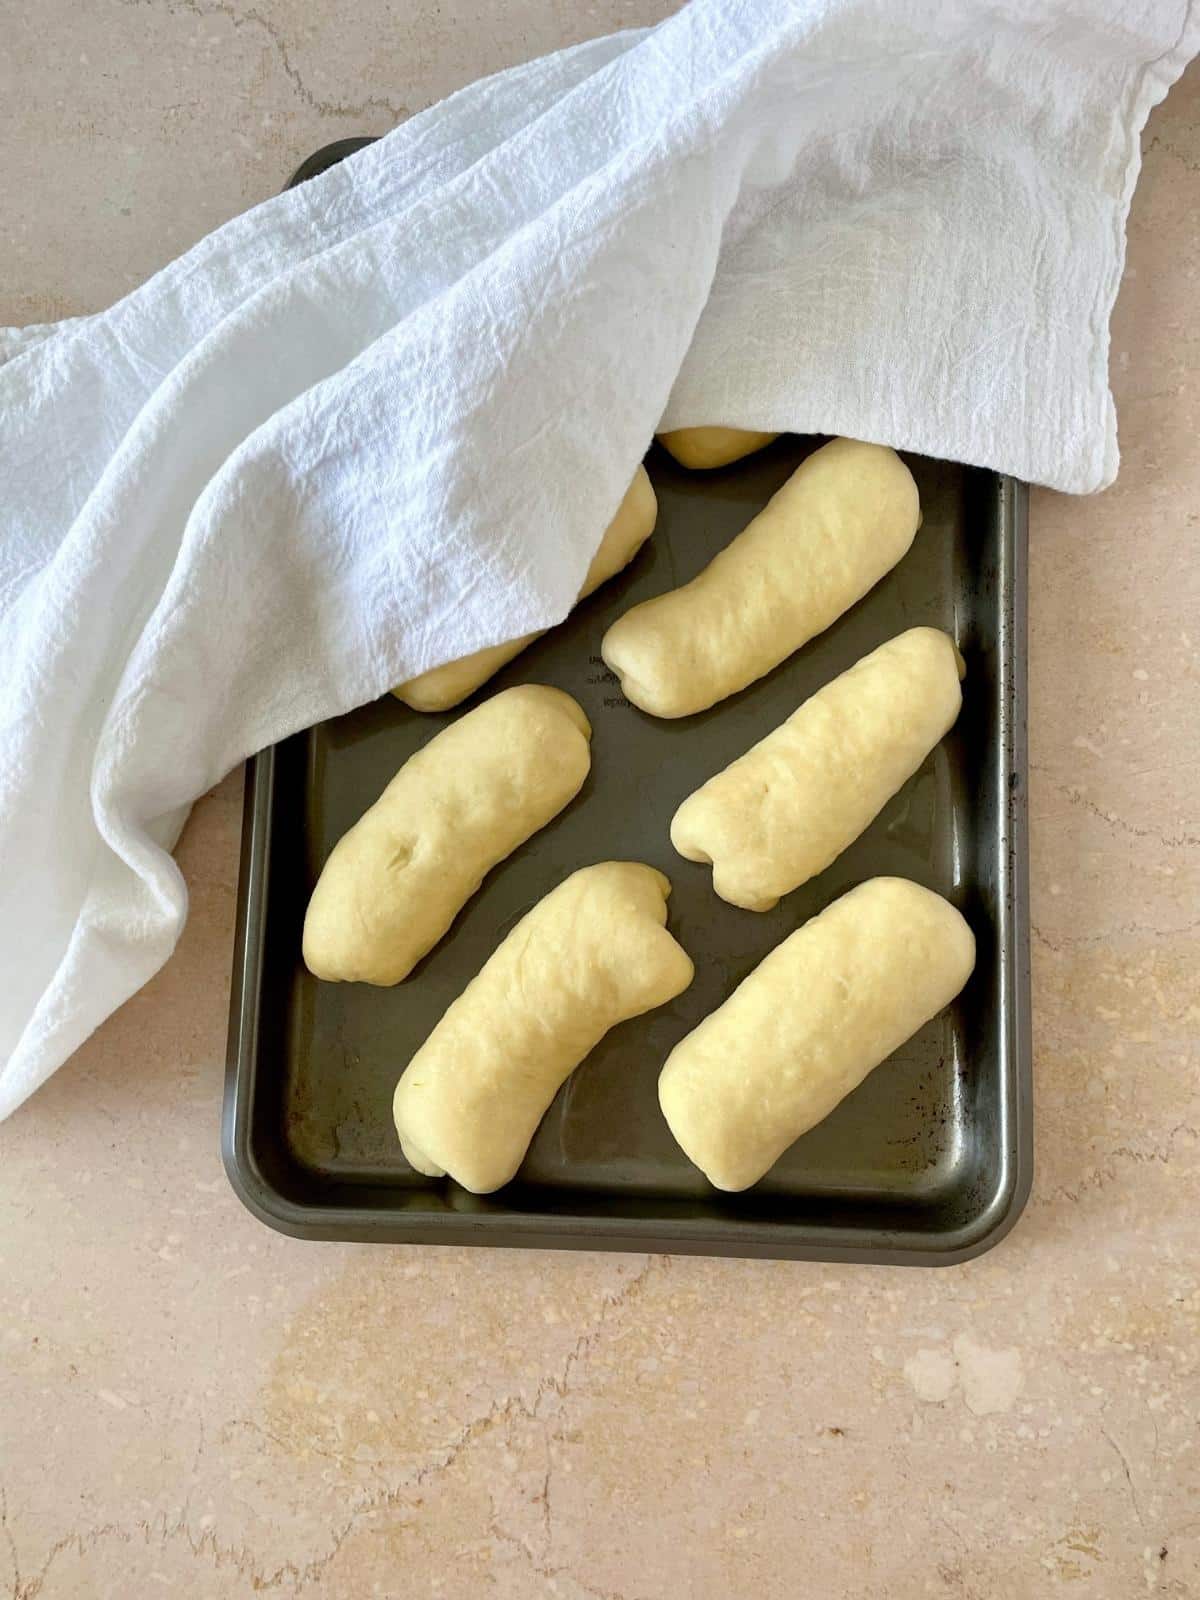 Covered rolls rising on a sheet pan.